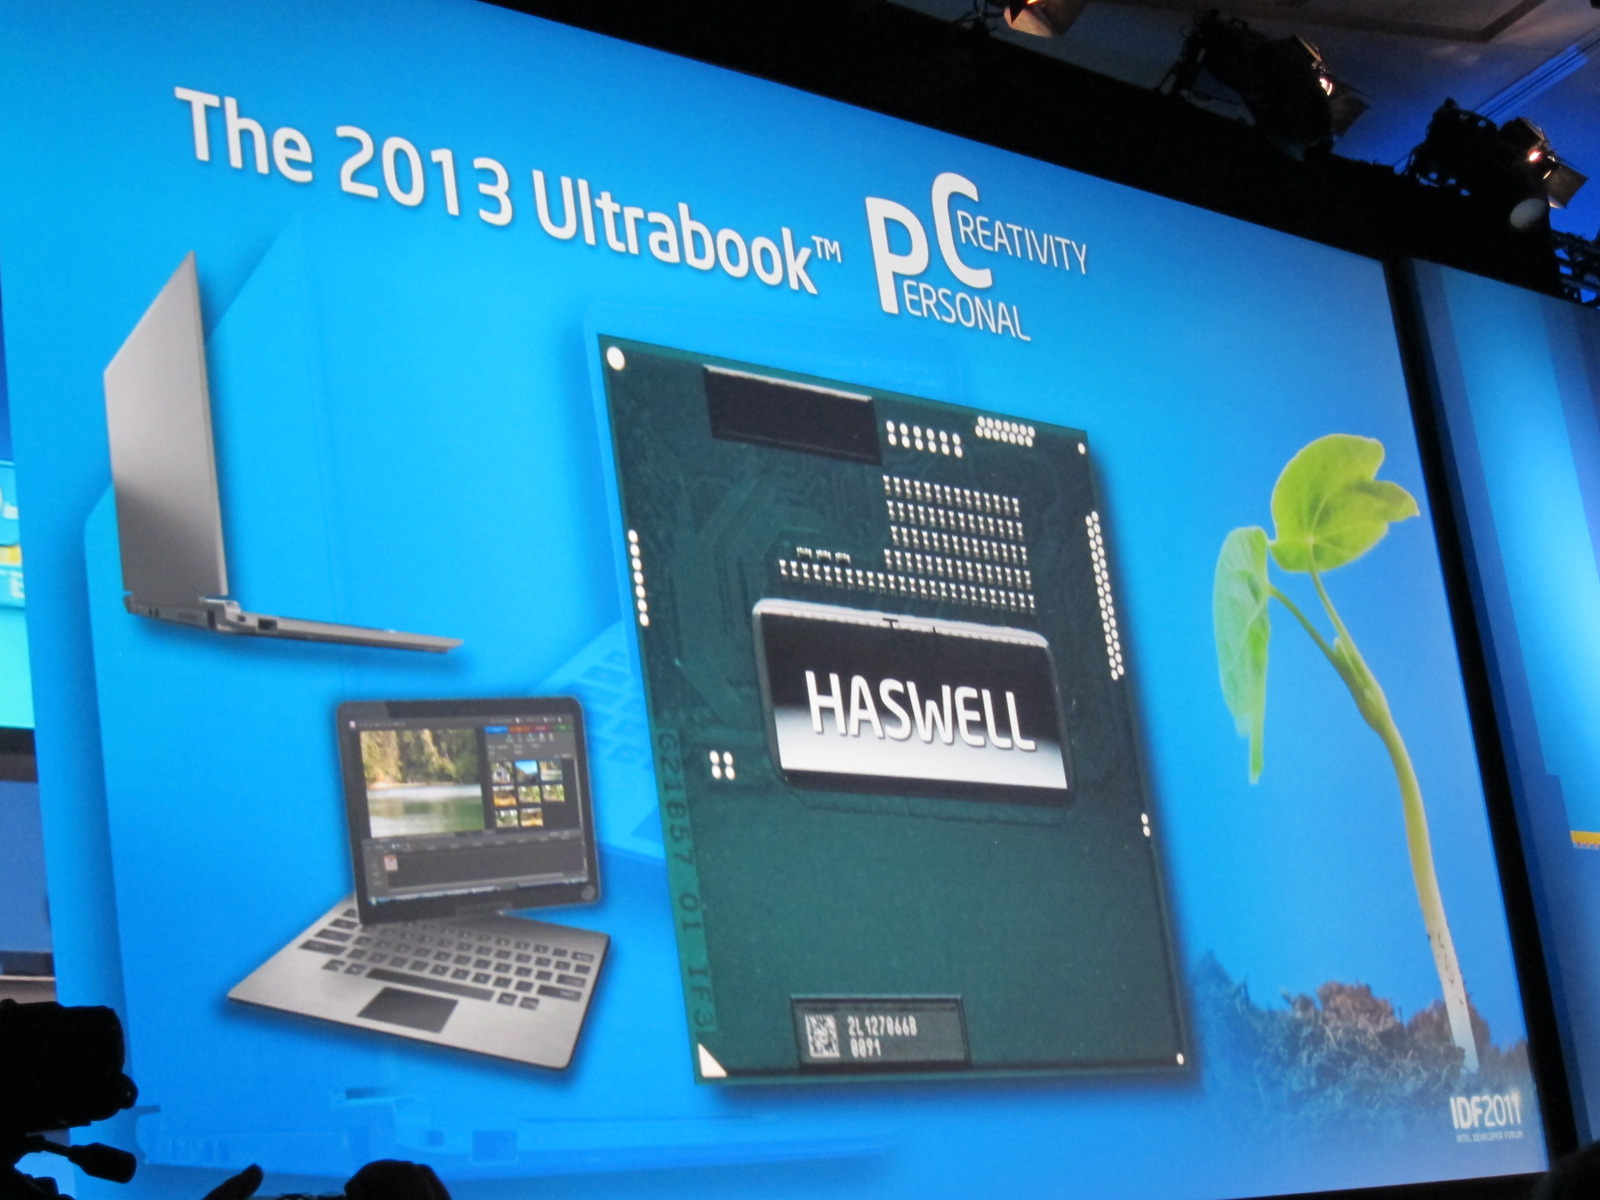 Intel S Haswell Architecture Analyzed Building A New Pc And